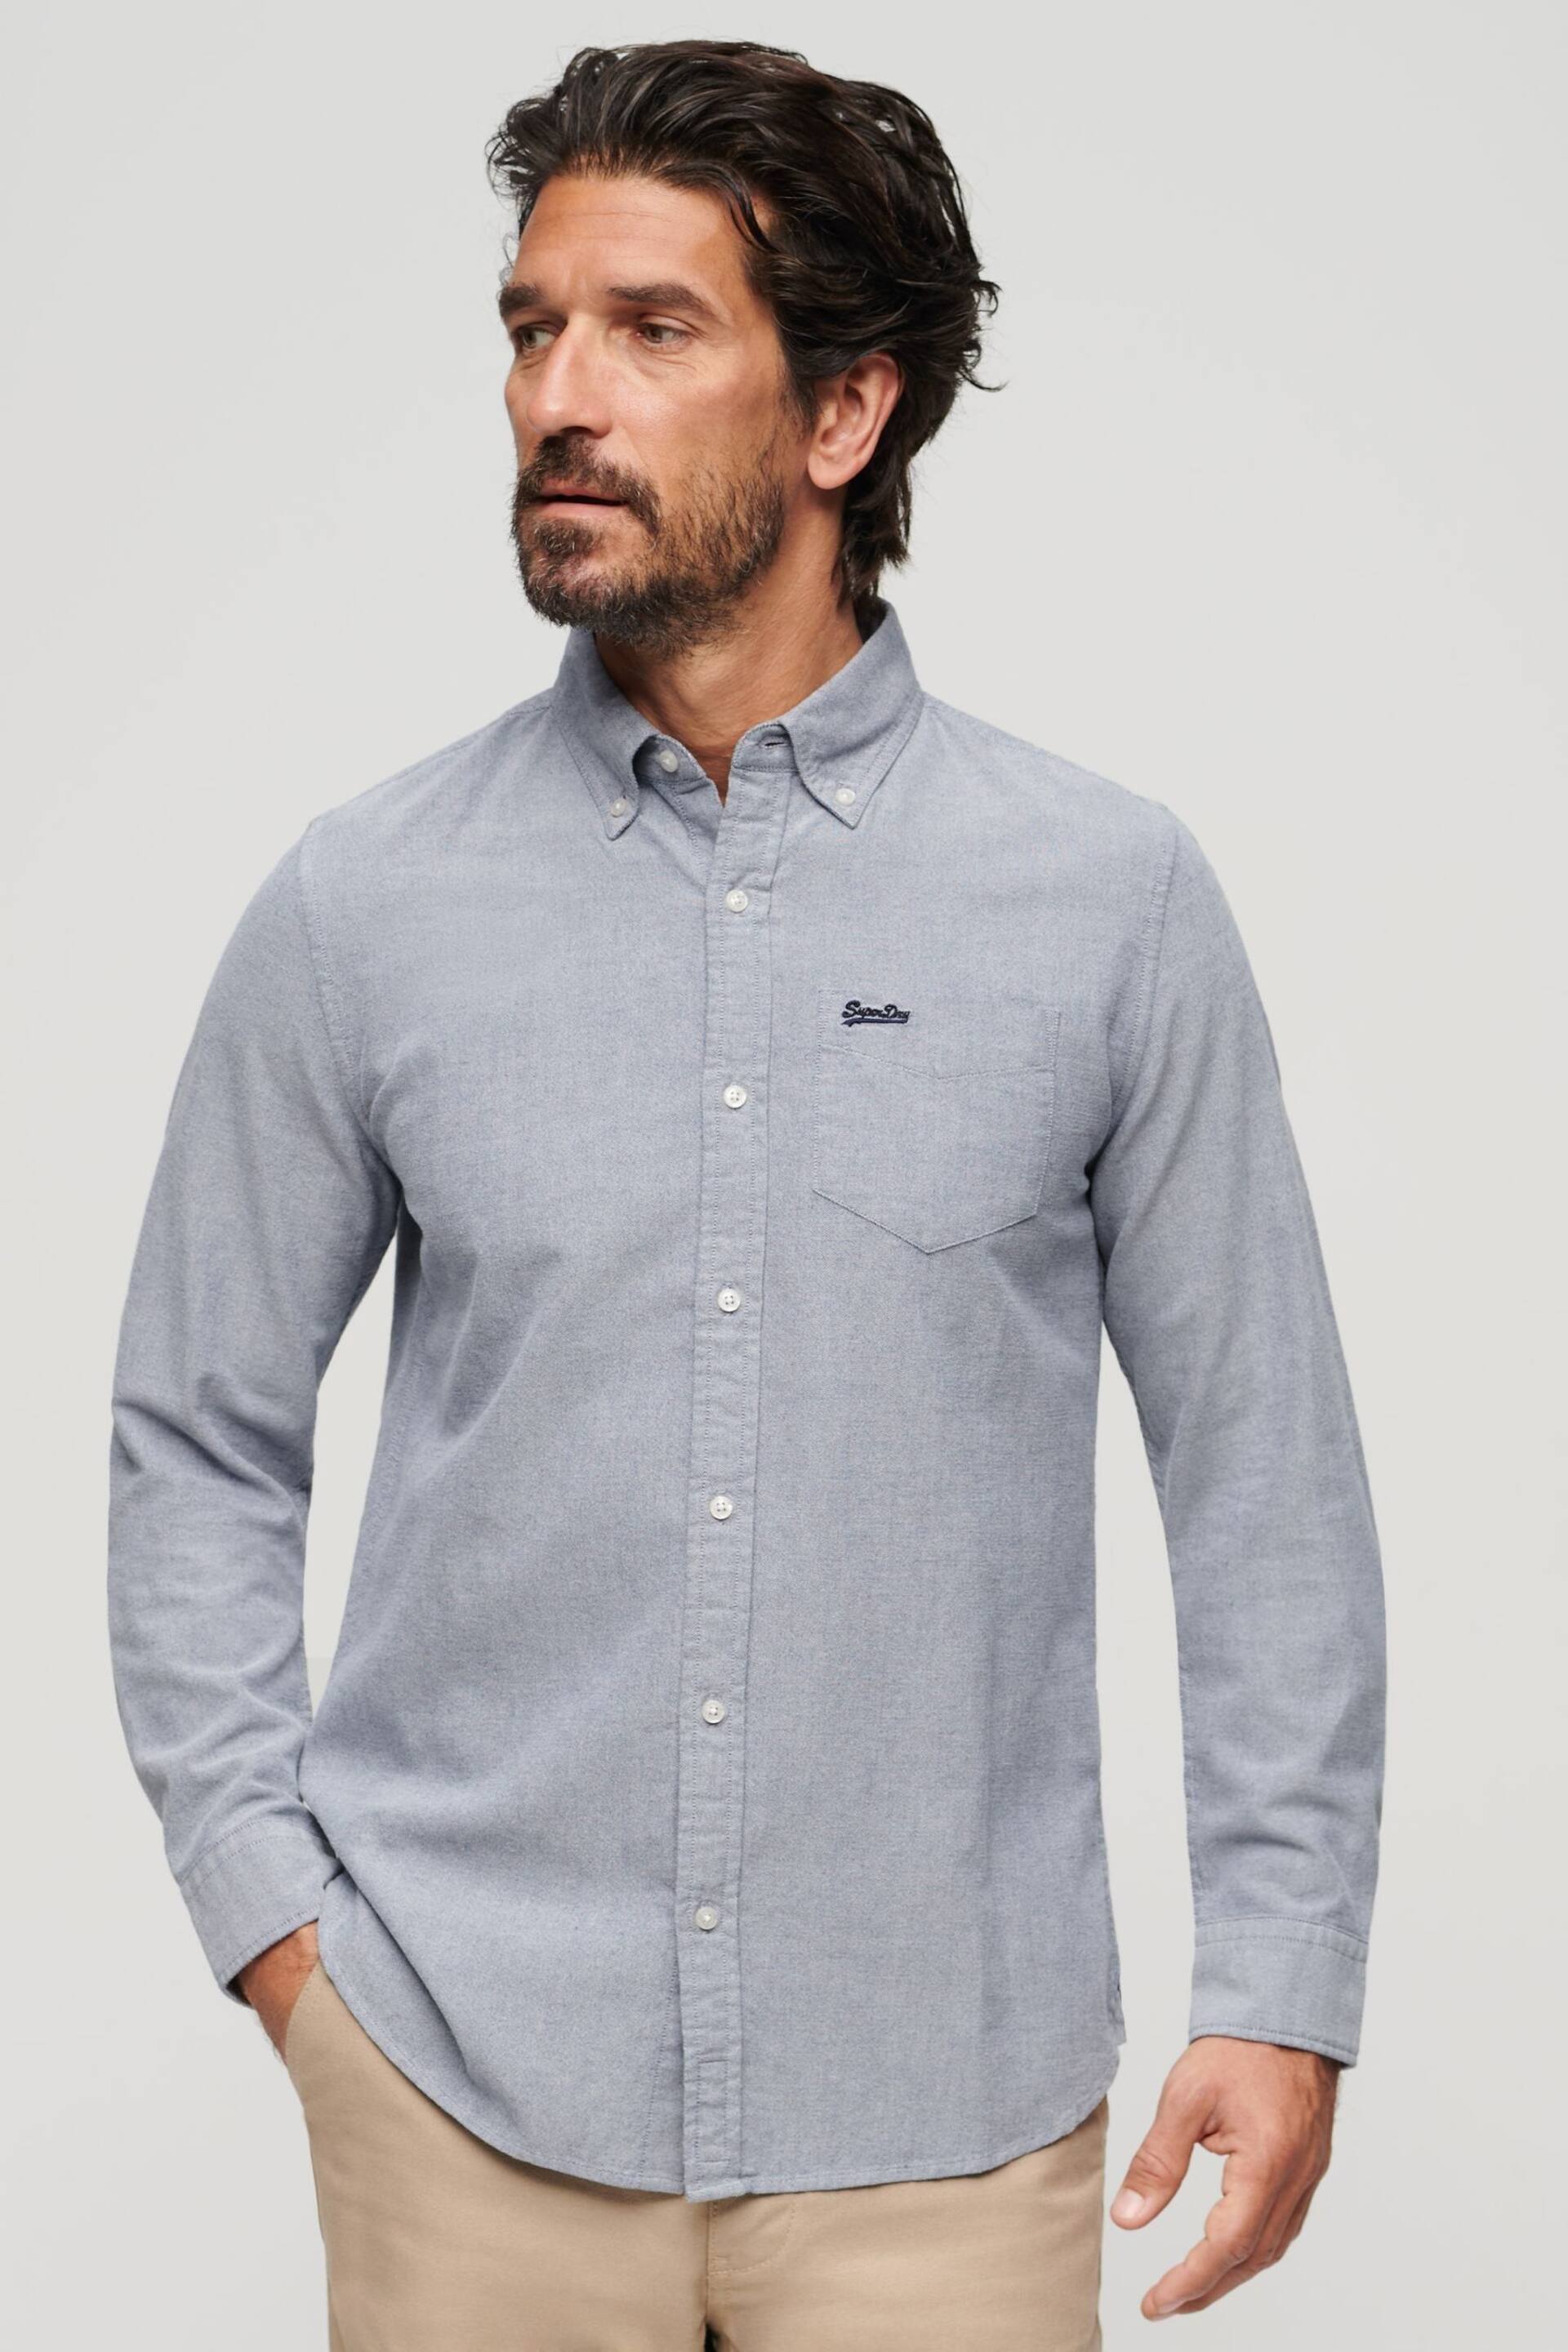 Superdry Blue Cotton Long Sleeved Oxford Shirt - Image 1 of 6